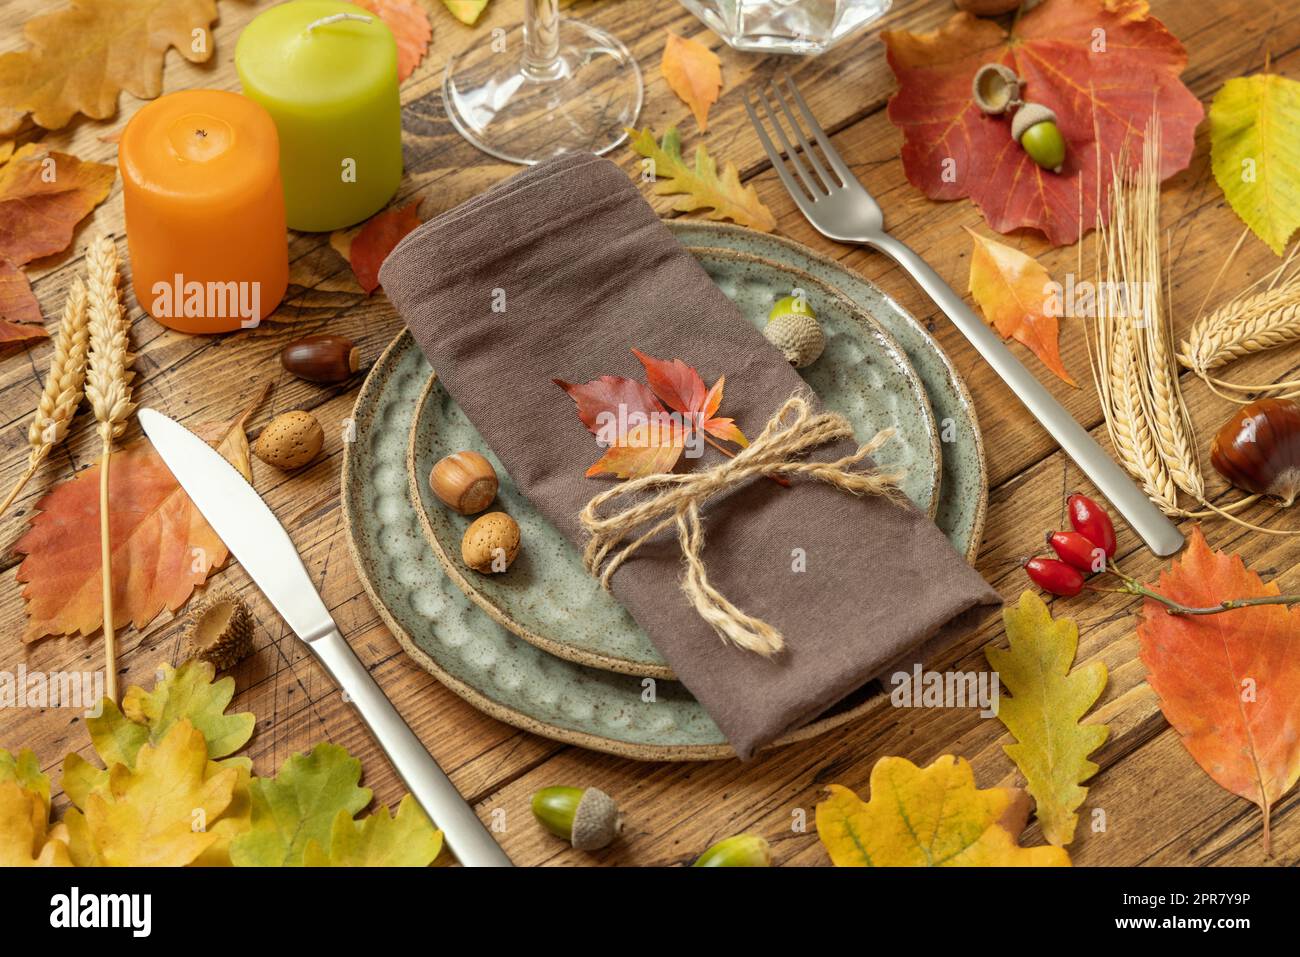 Autumn rustic table setting between leaves and berries on vintage wooden table close up Stock Photo